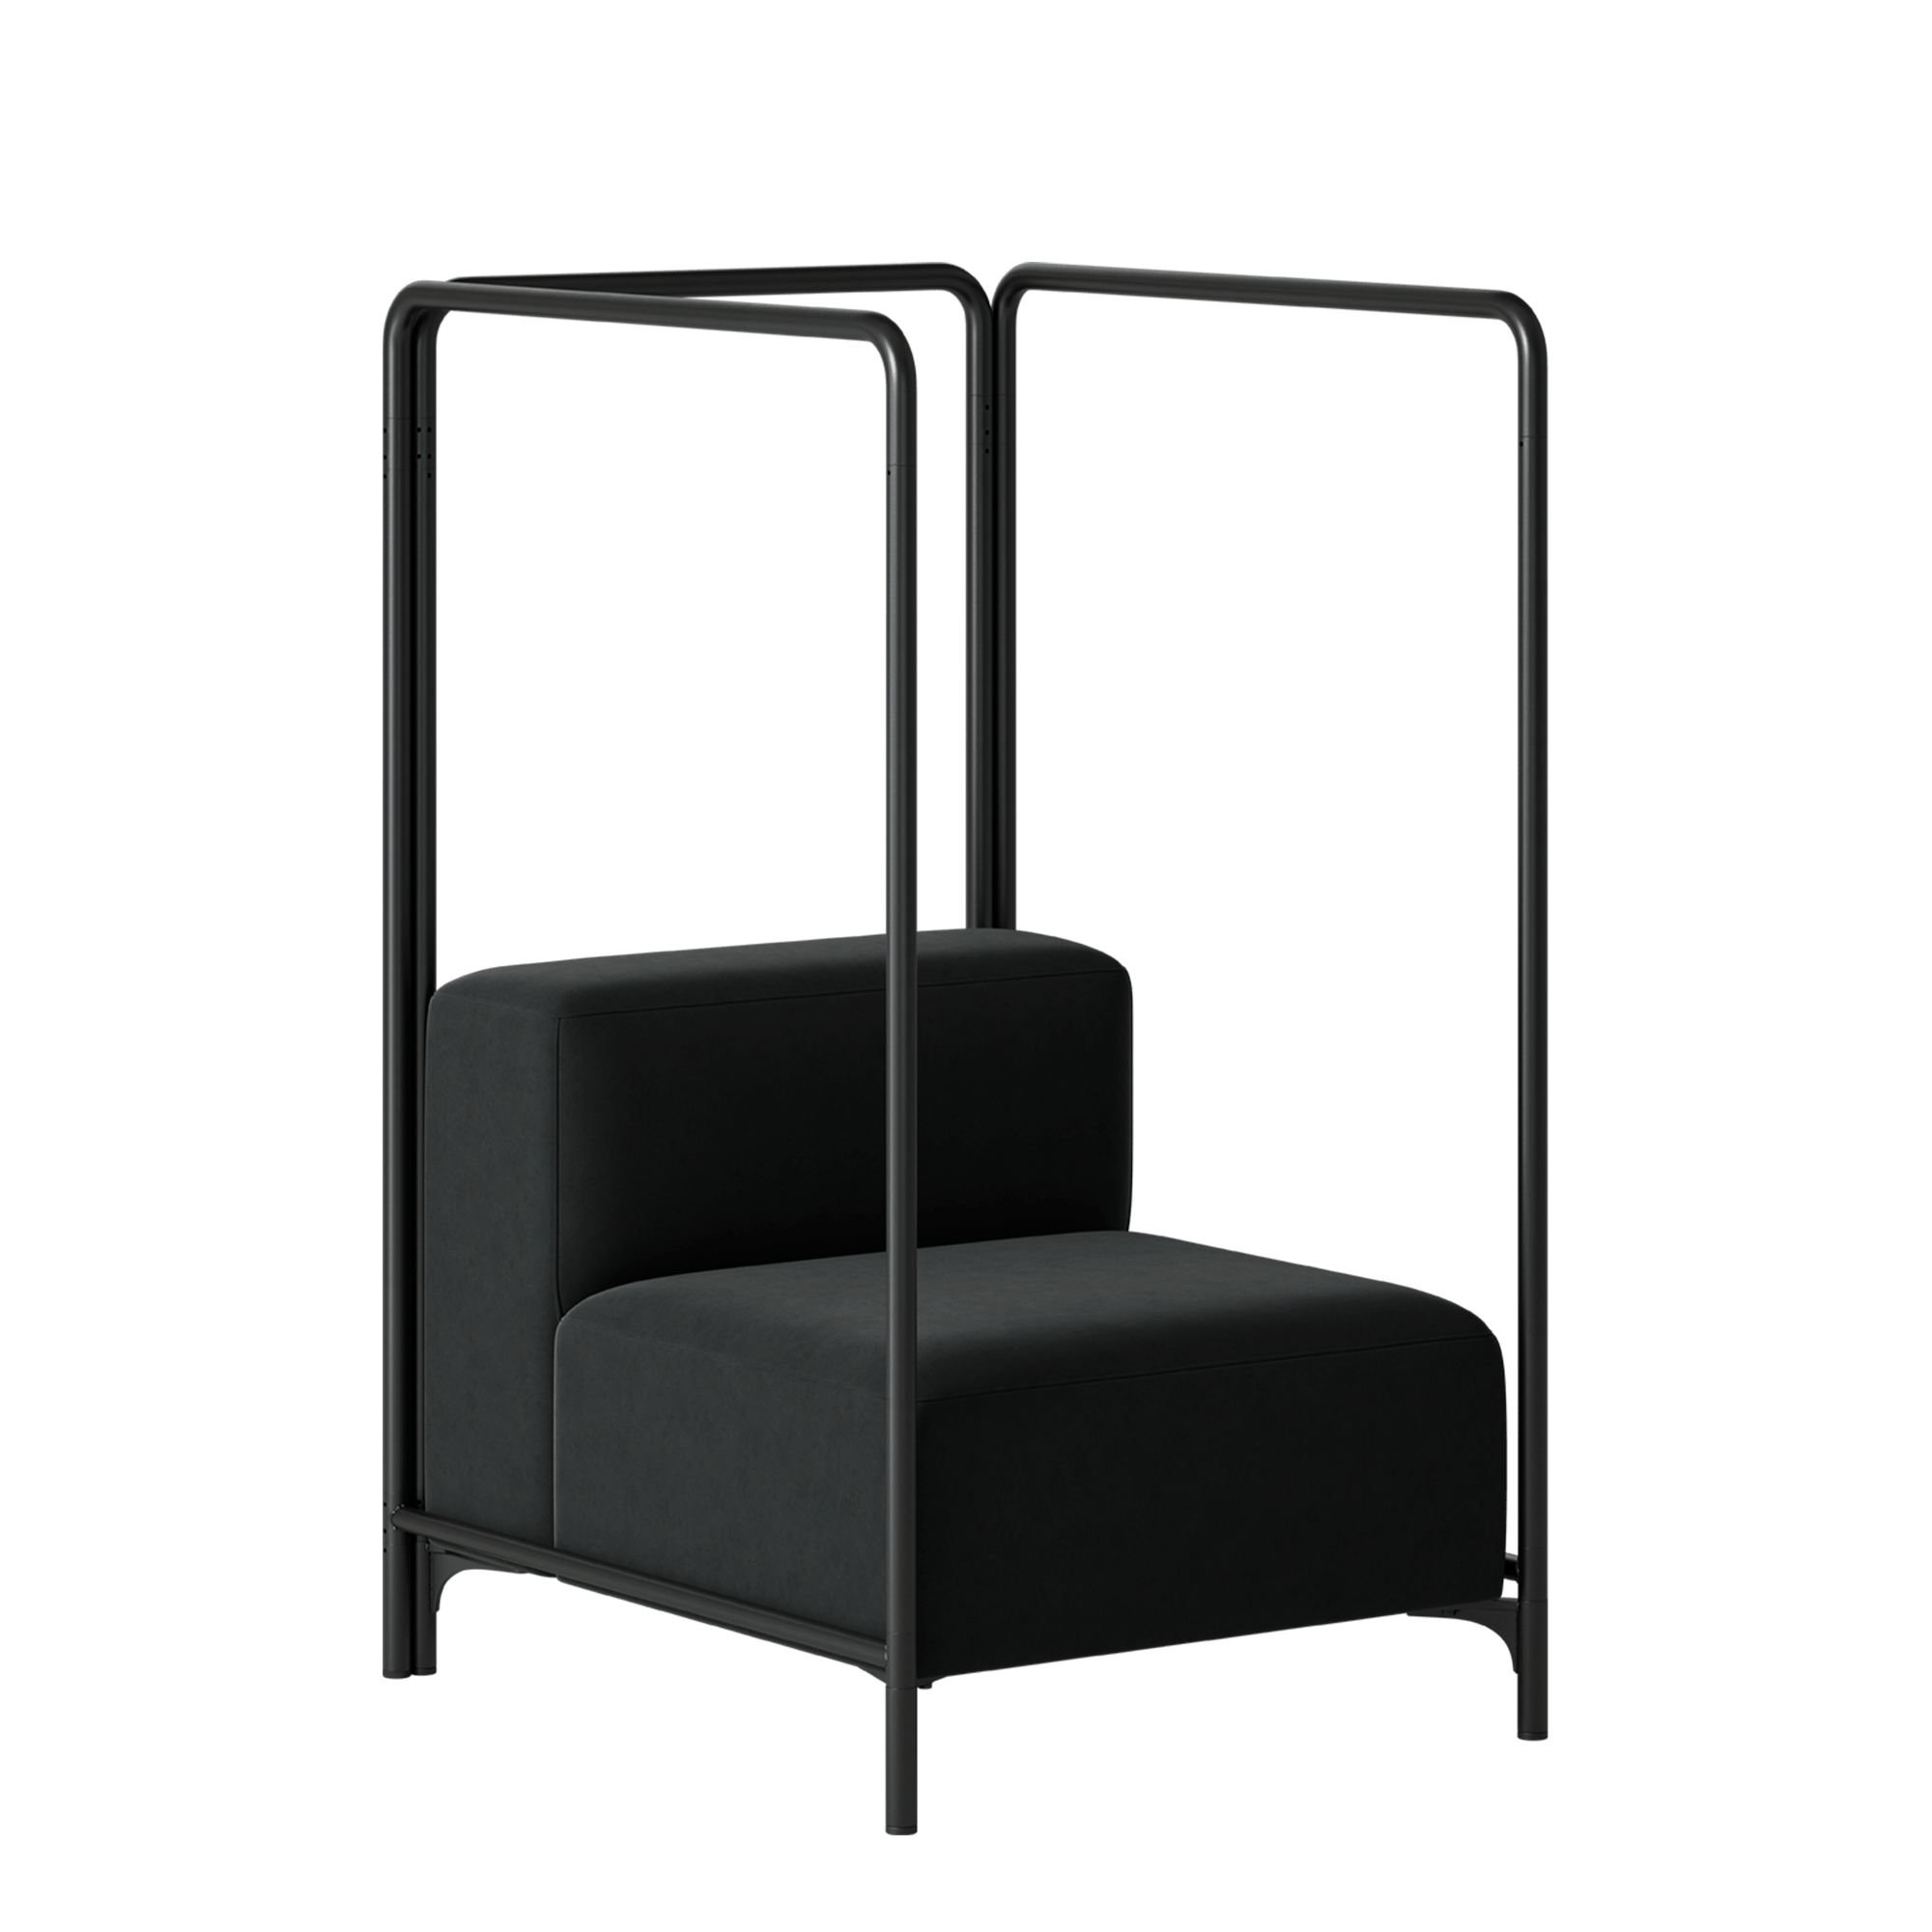 A black chair with a metal frame and a black cushion.